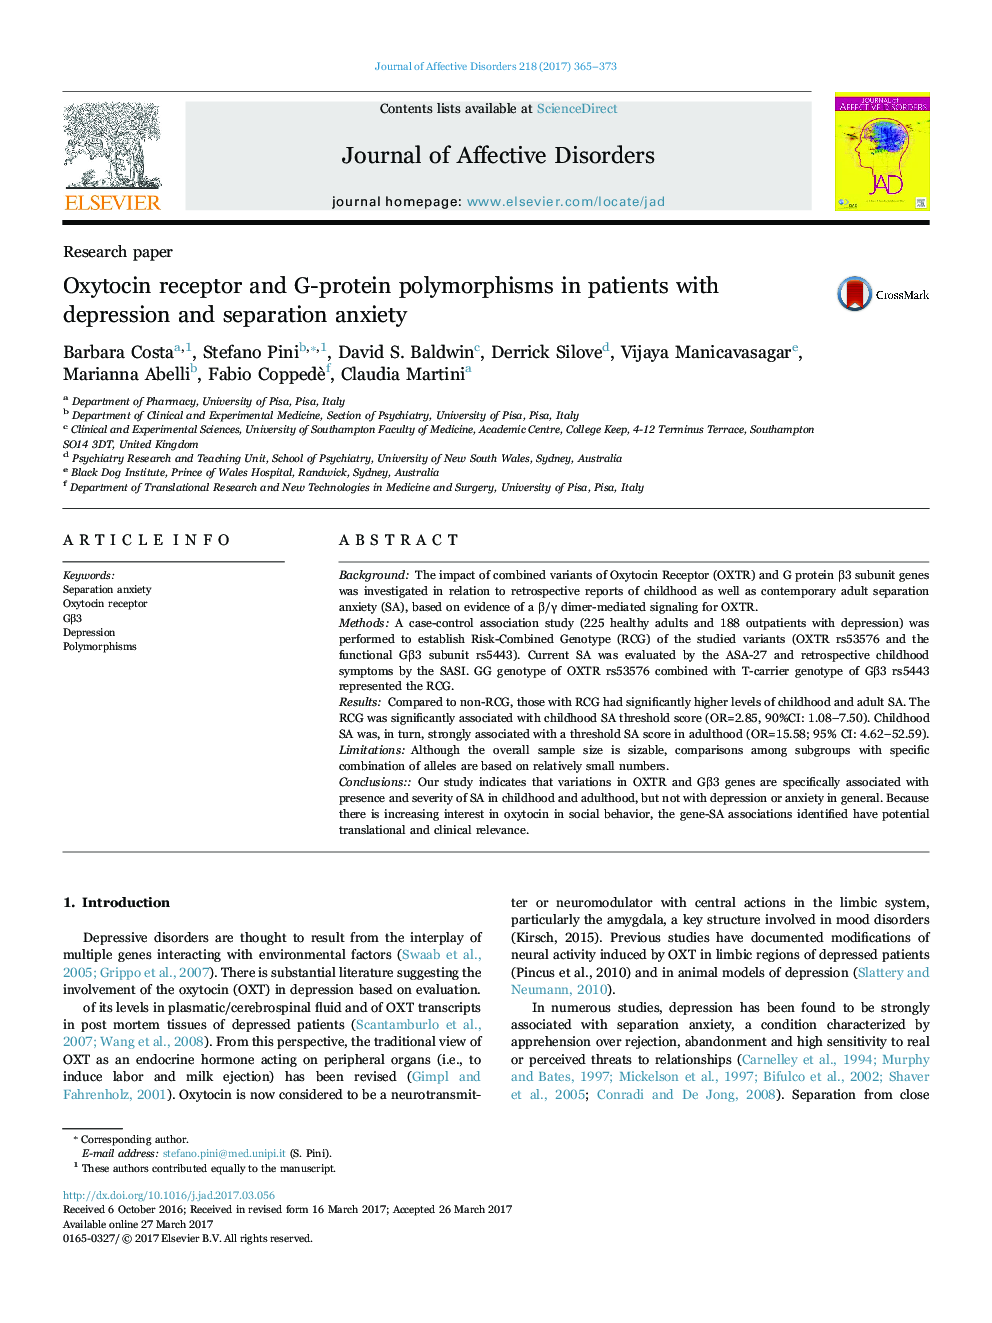 Research paperOxytocin receptor and G-protein polymorphisms in patients with depression and separation anxiety